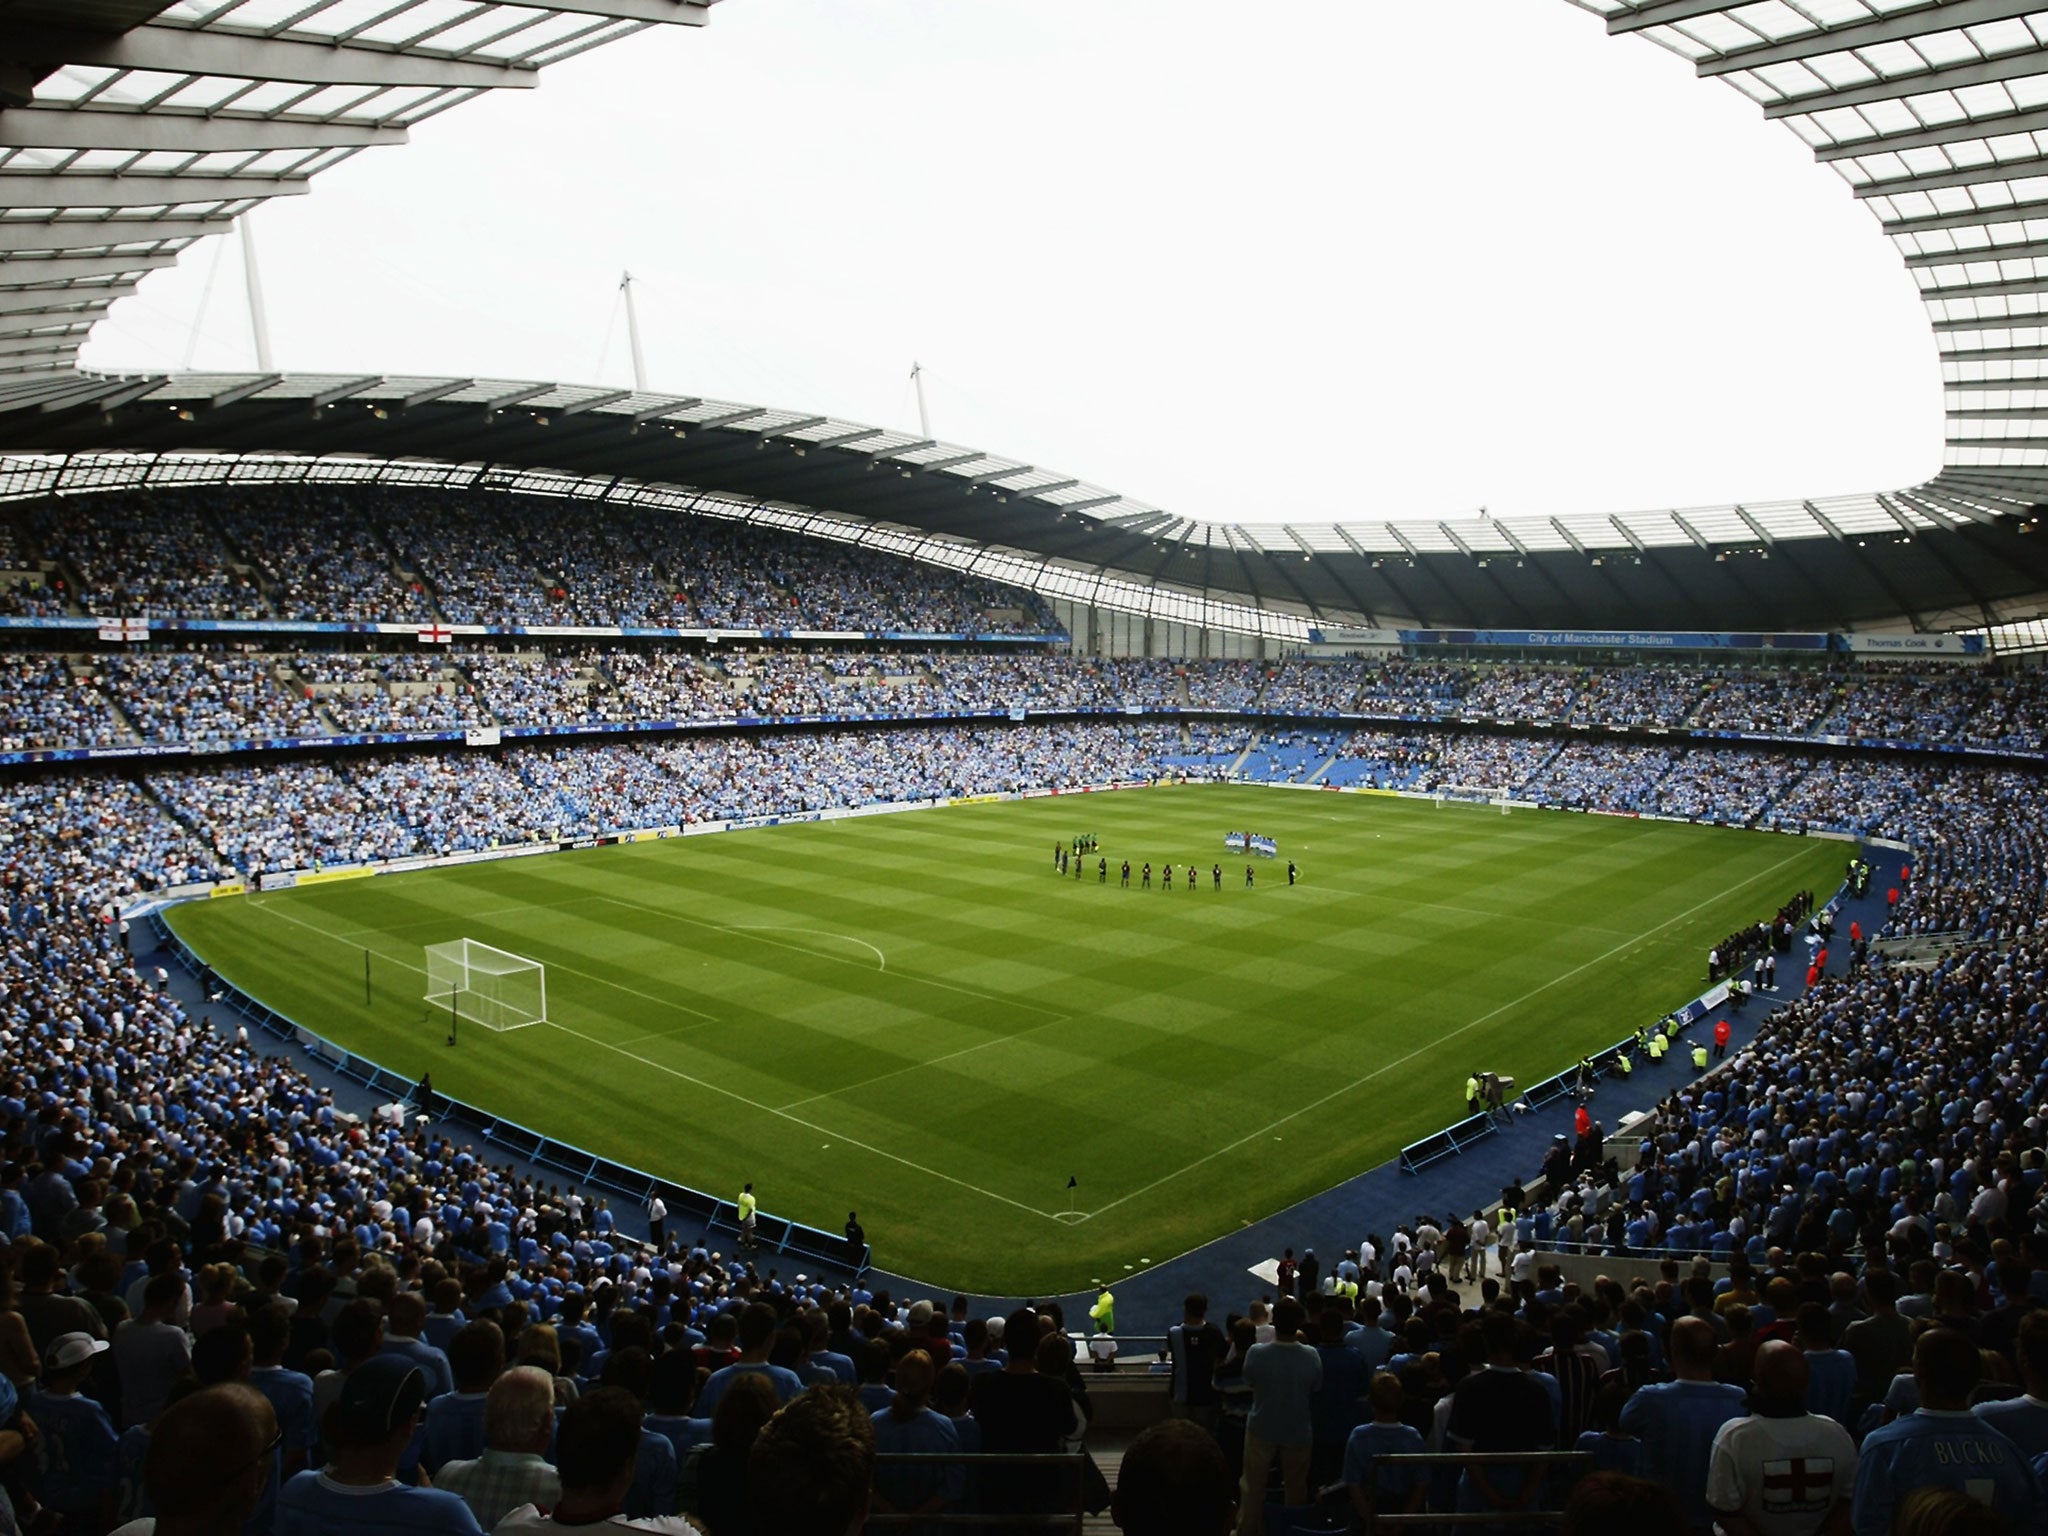 Manchester City want to increase the capacity of the Etihad Stadium to 61,000